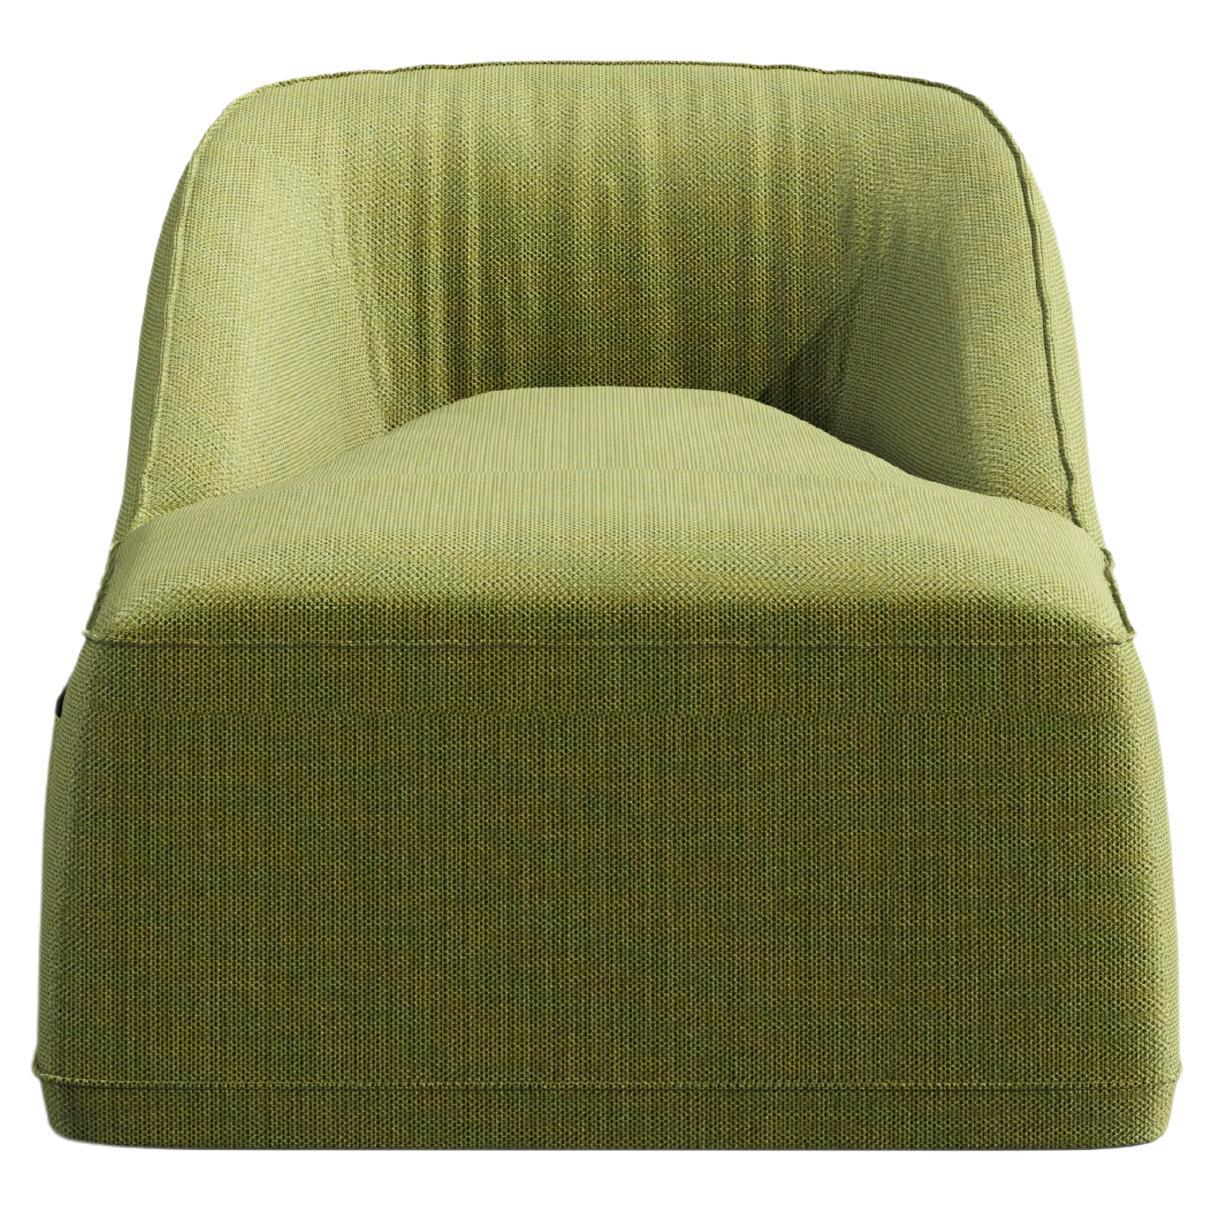 Modern Outdoor Chair with Weather-Resistant Sunbrella Fabric Upholstery in Green For Sale